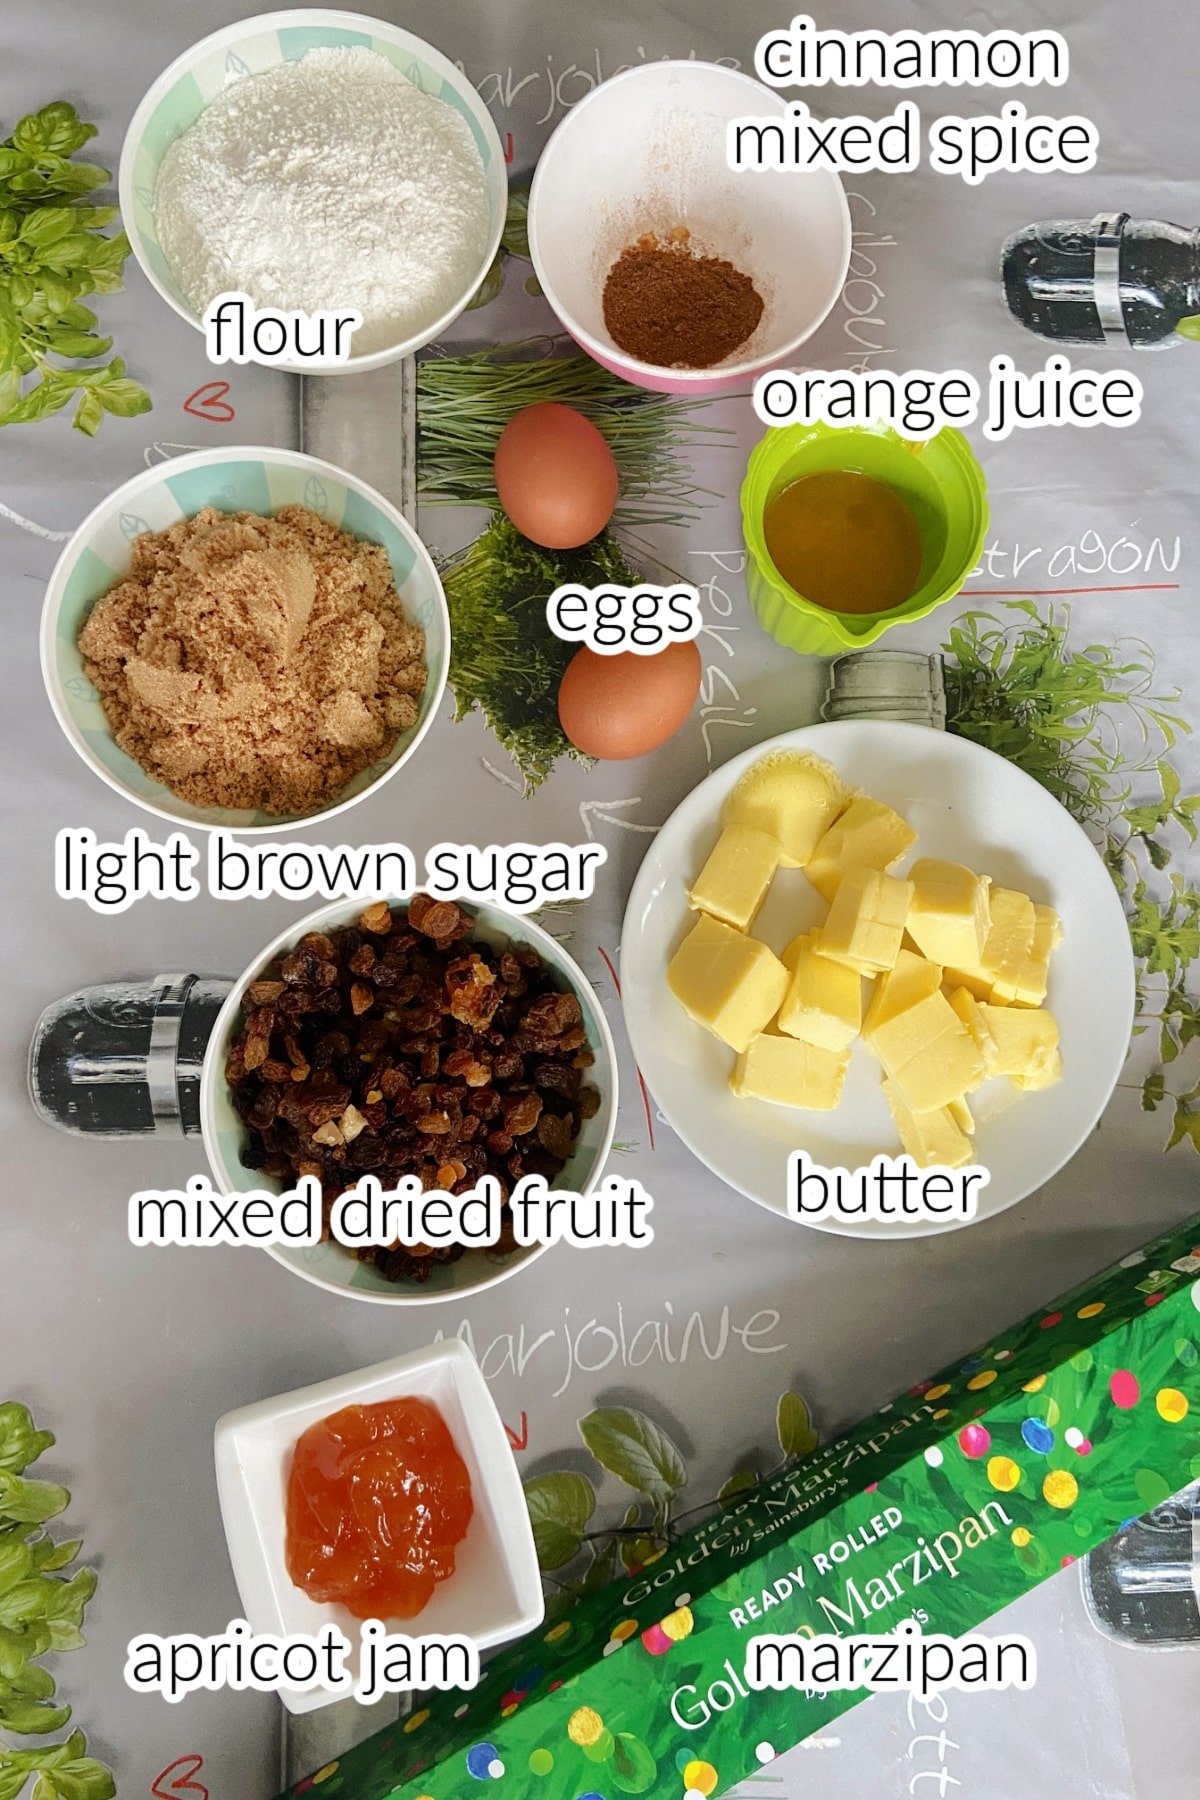 Ingredients needed to make simnel cupcakes.